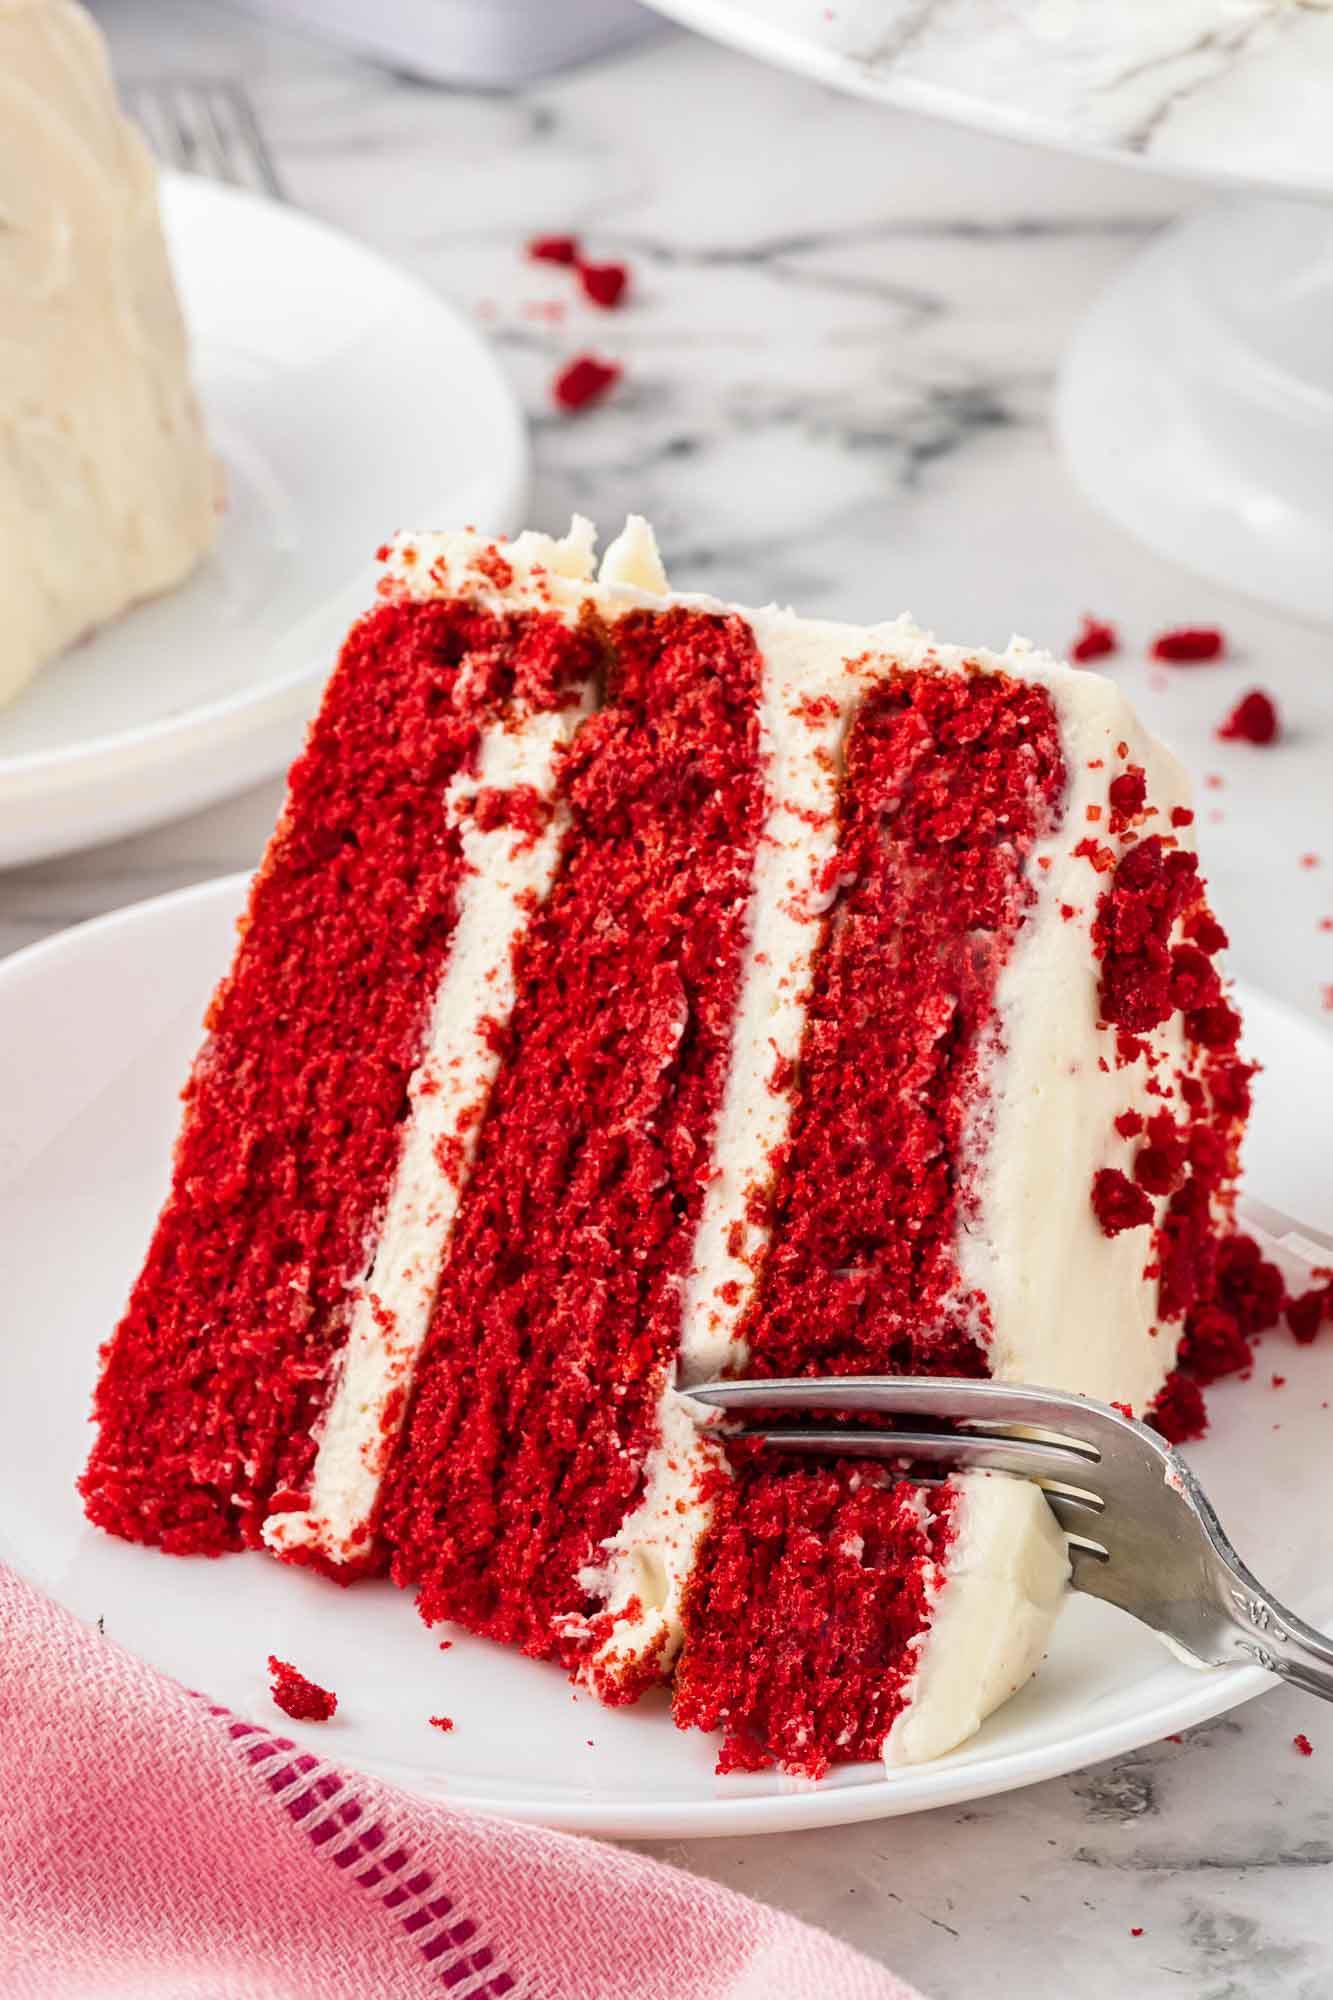 A slice of red velvet cake on a plate and a fork